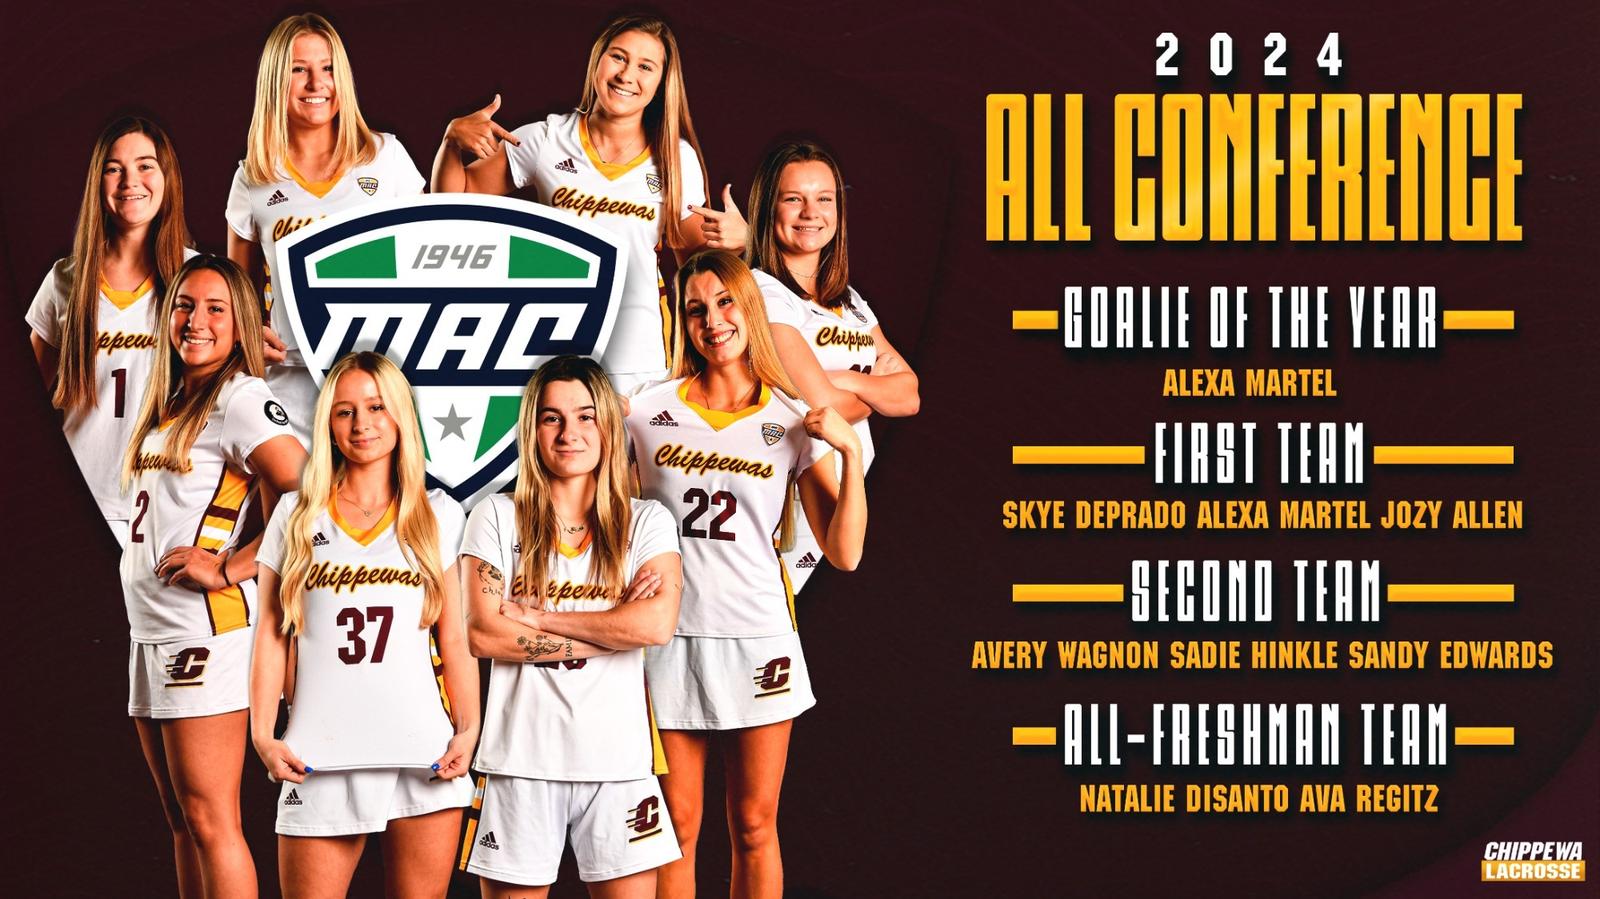 Martel Named MAC Lacrosse Goalkeeper of the Year, Six Chippewas Earn All-Conference